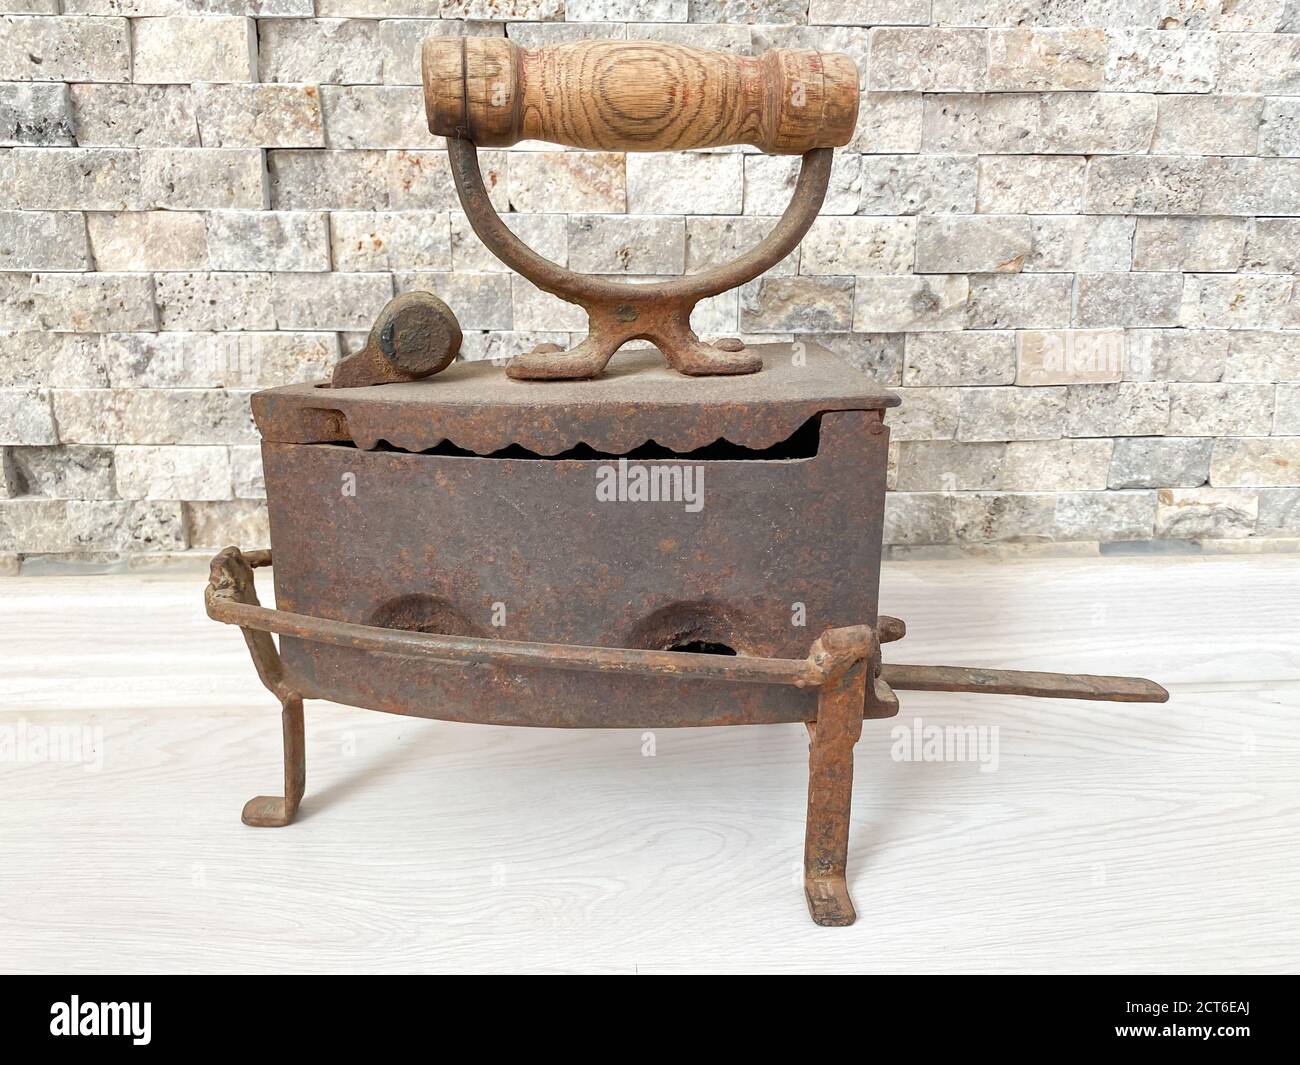 Old vintage iron. Old iron, heated by hot coals. Stock Photo